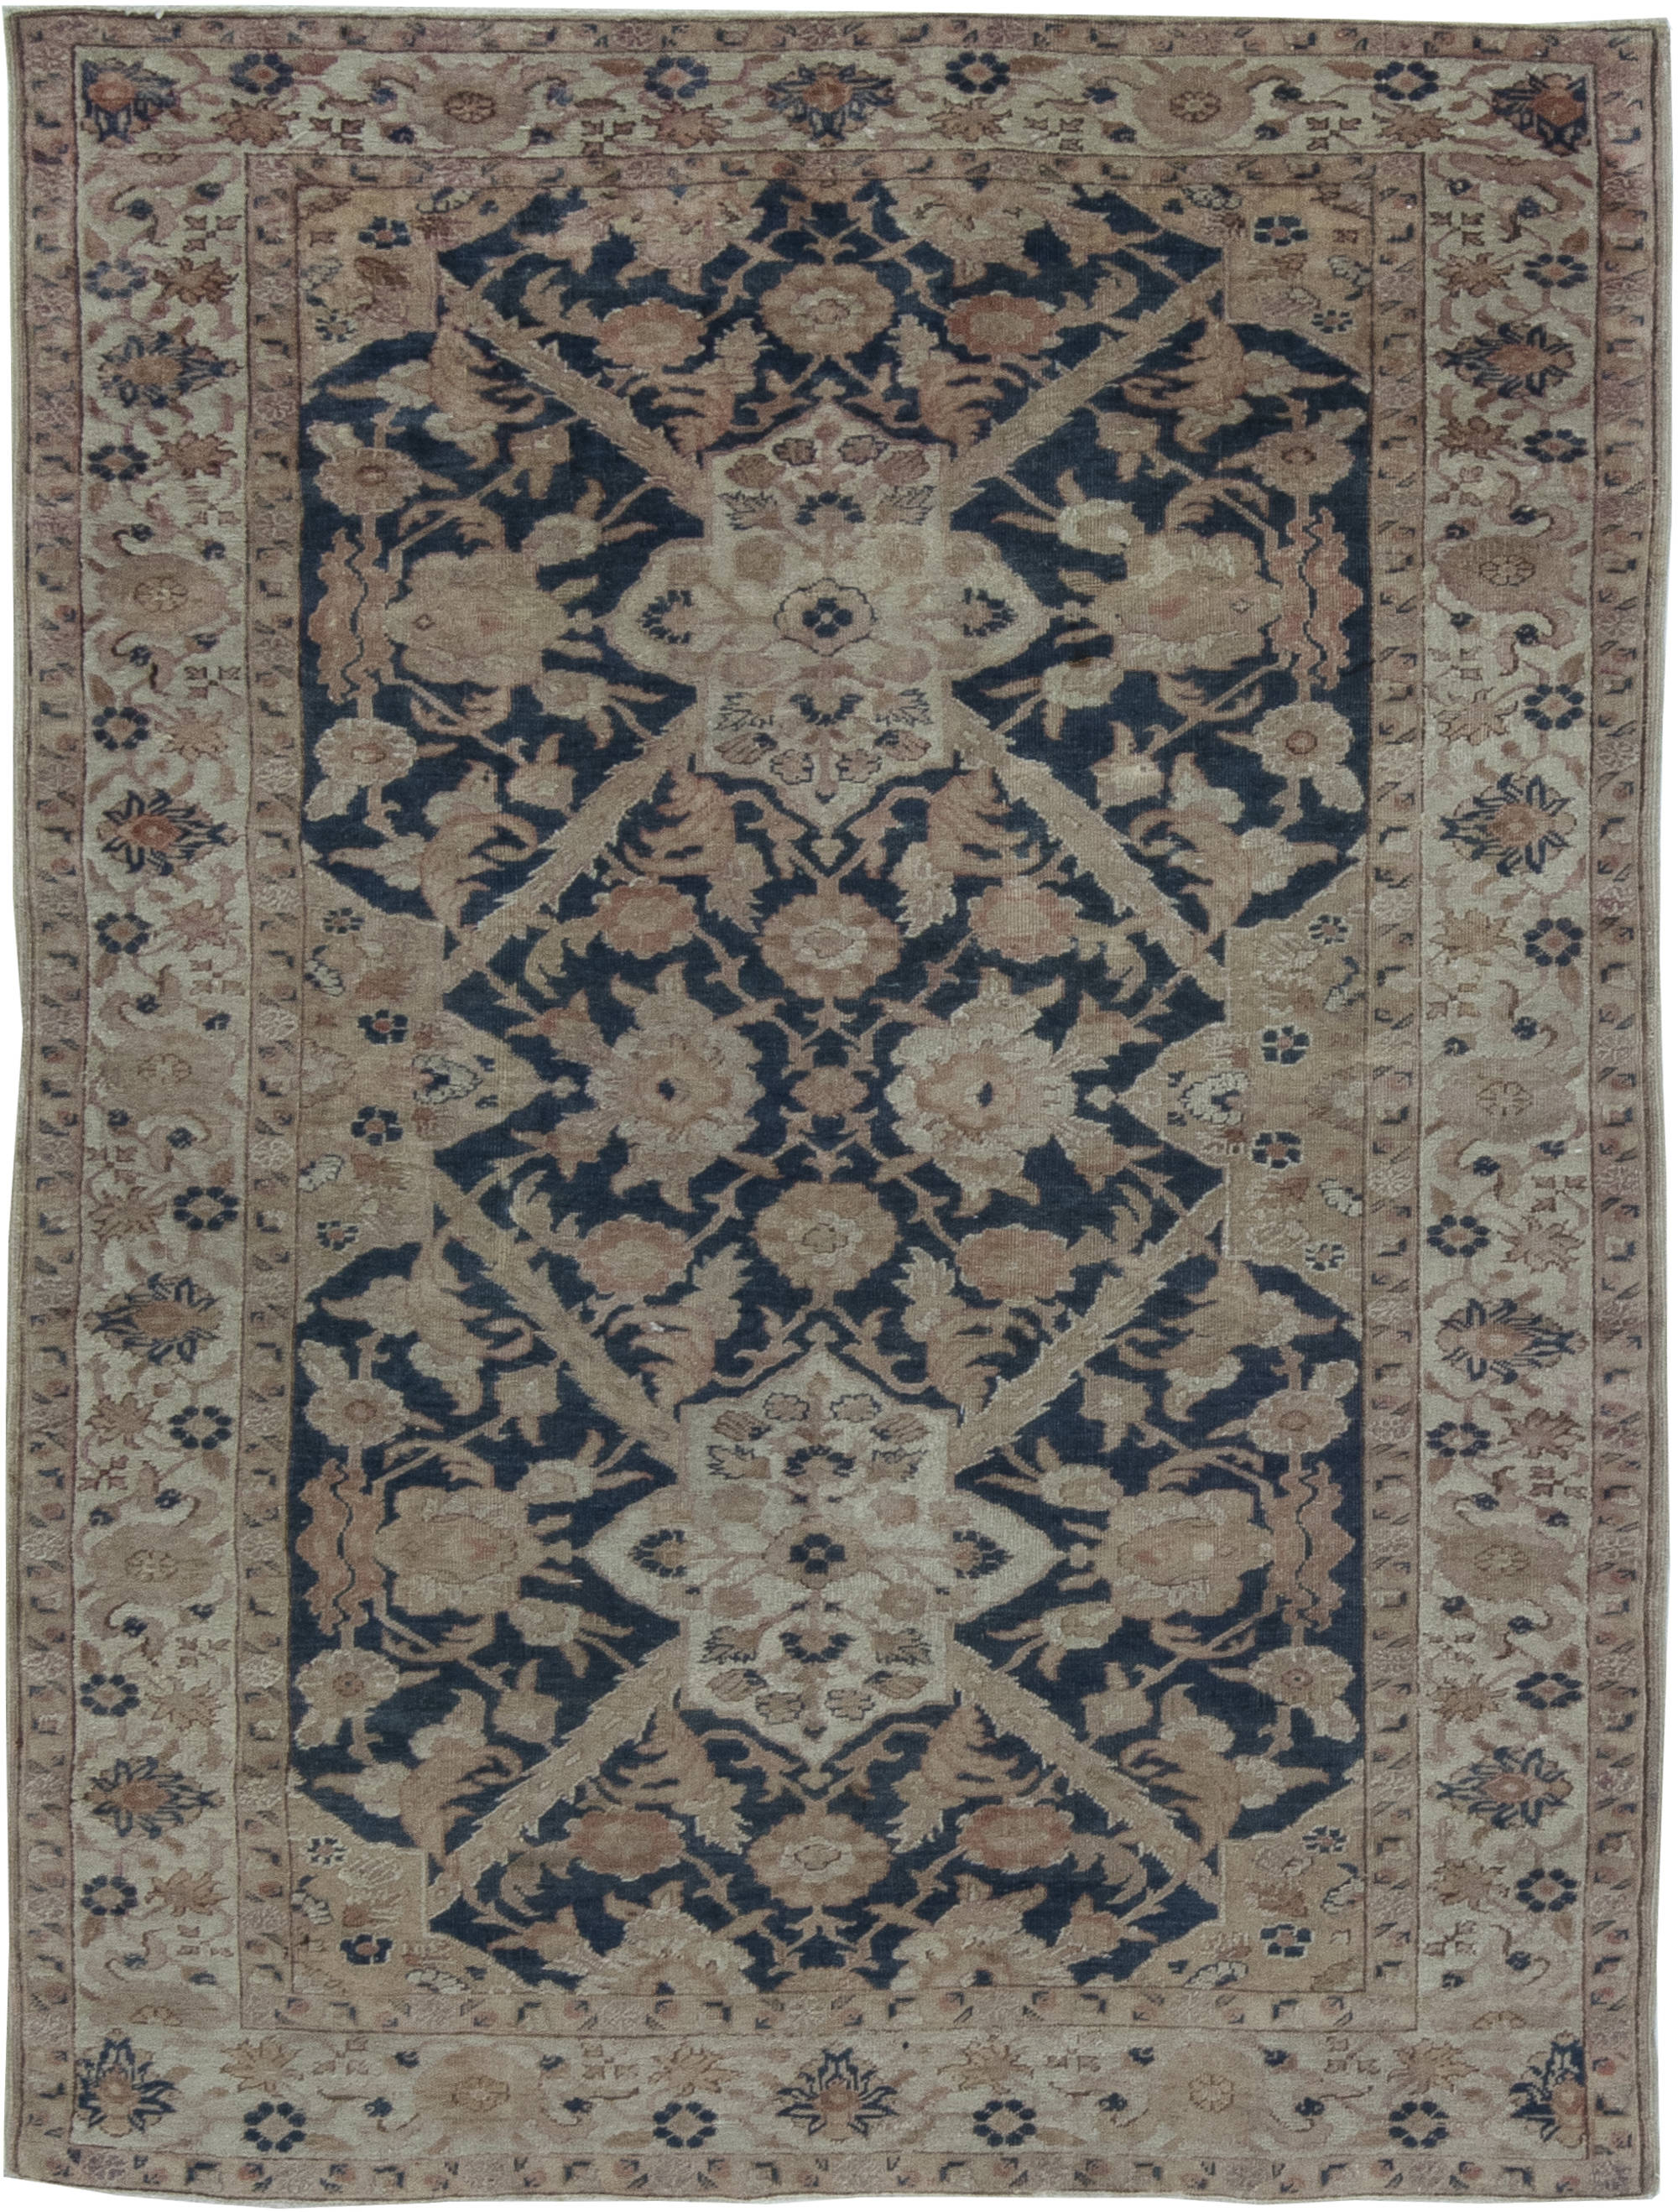 Antique Turkish Rugs & Kilim Carpets For Sale (Area, Runner Rug) • NYC